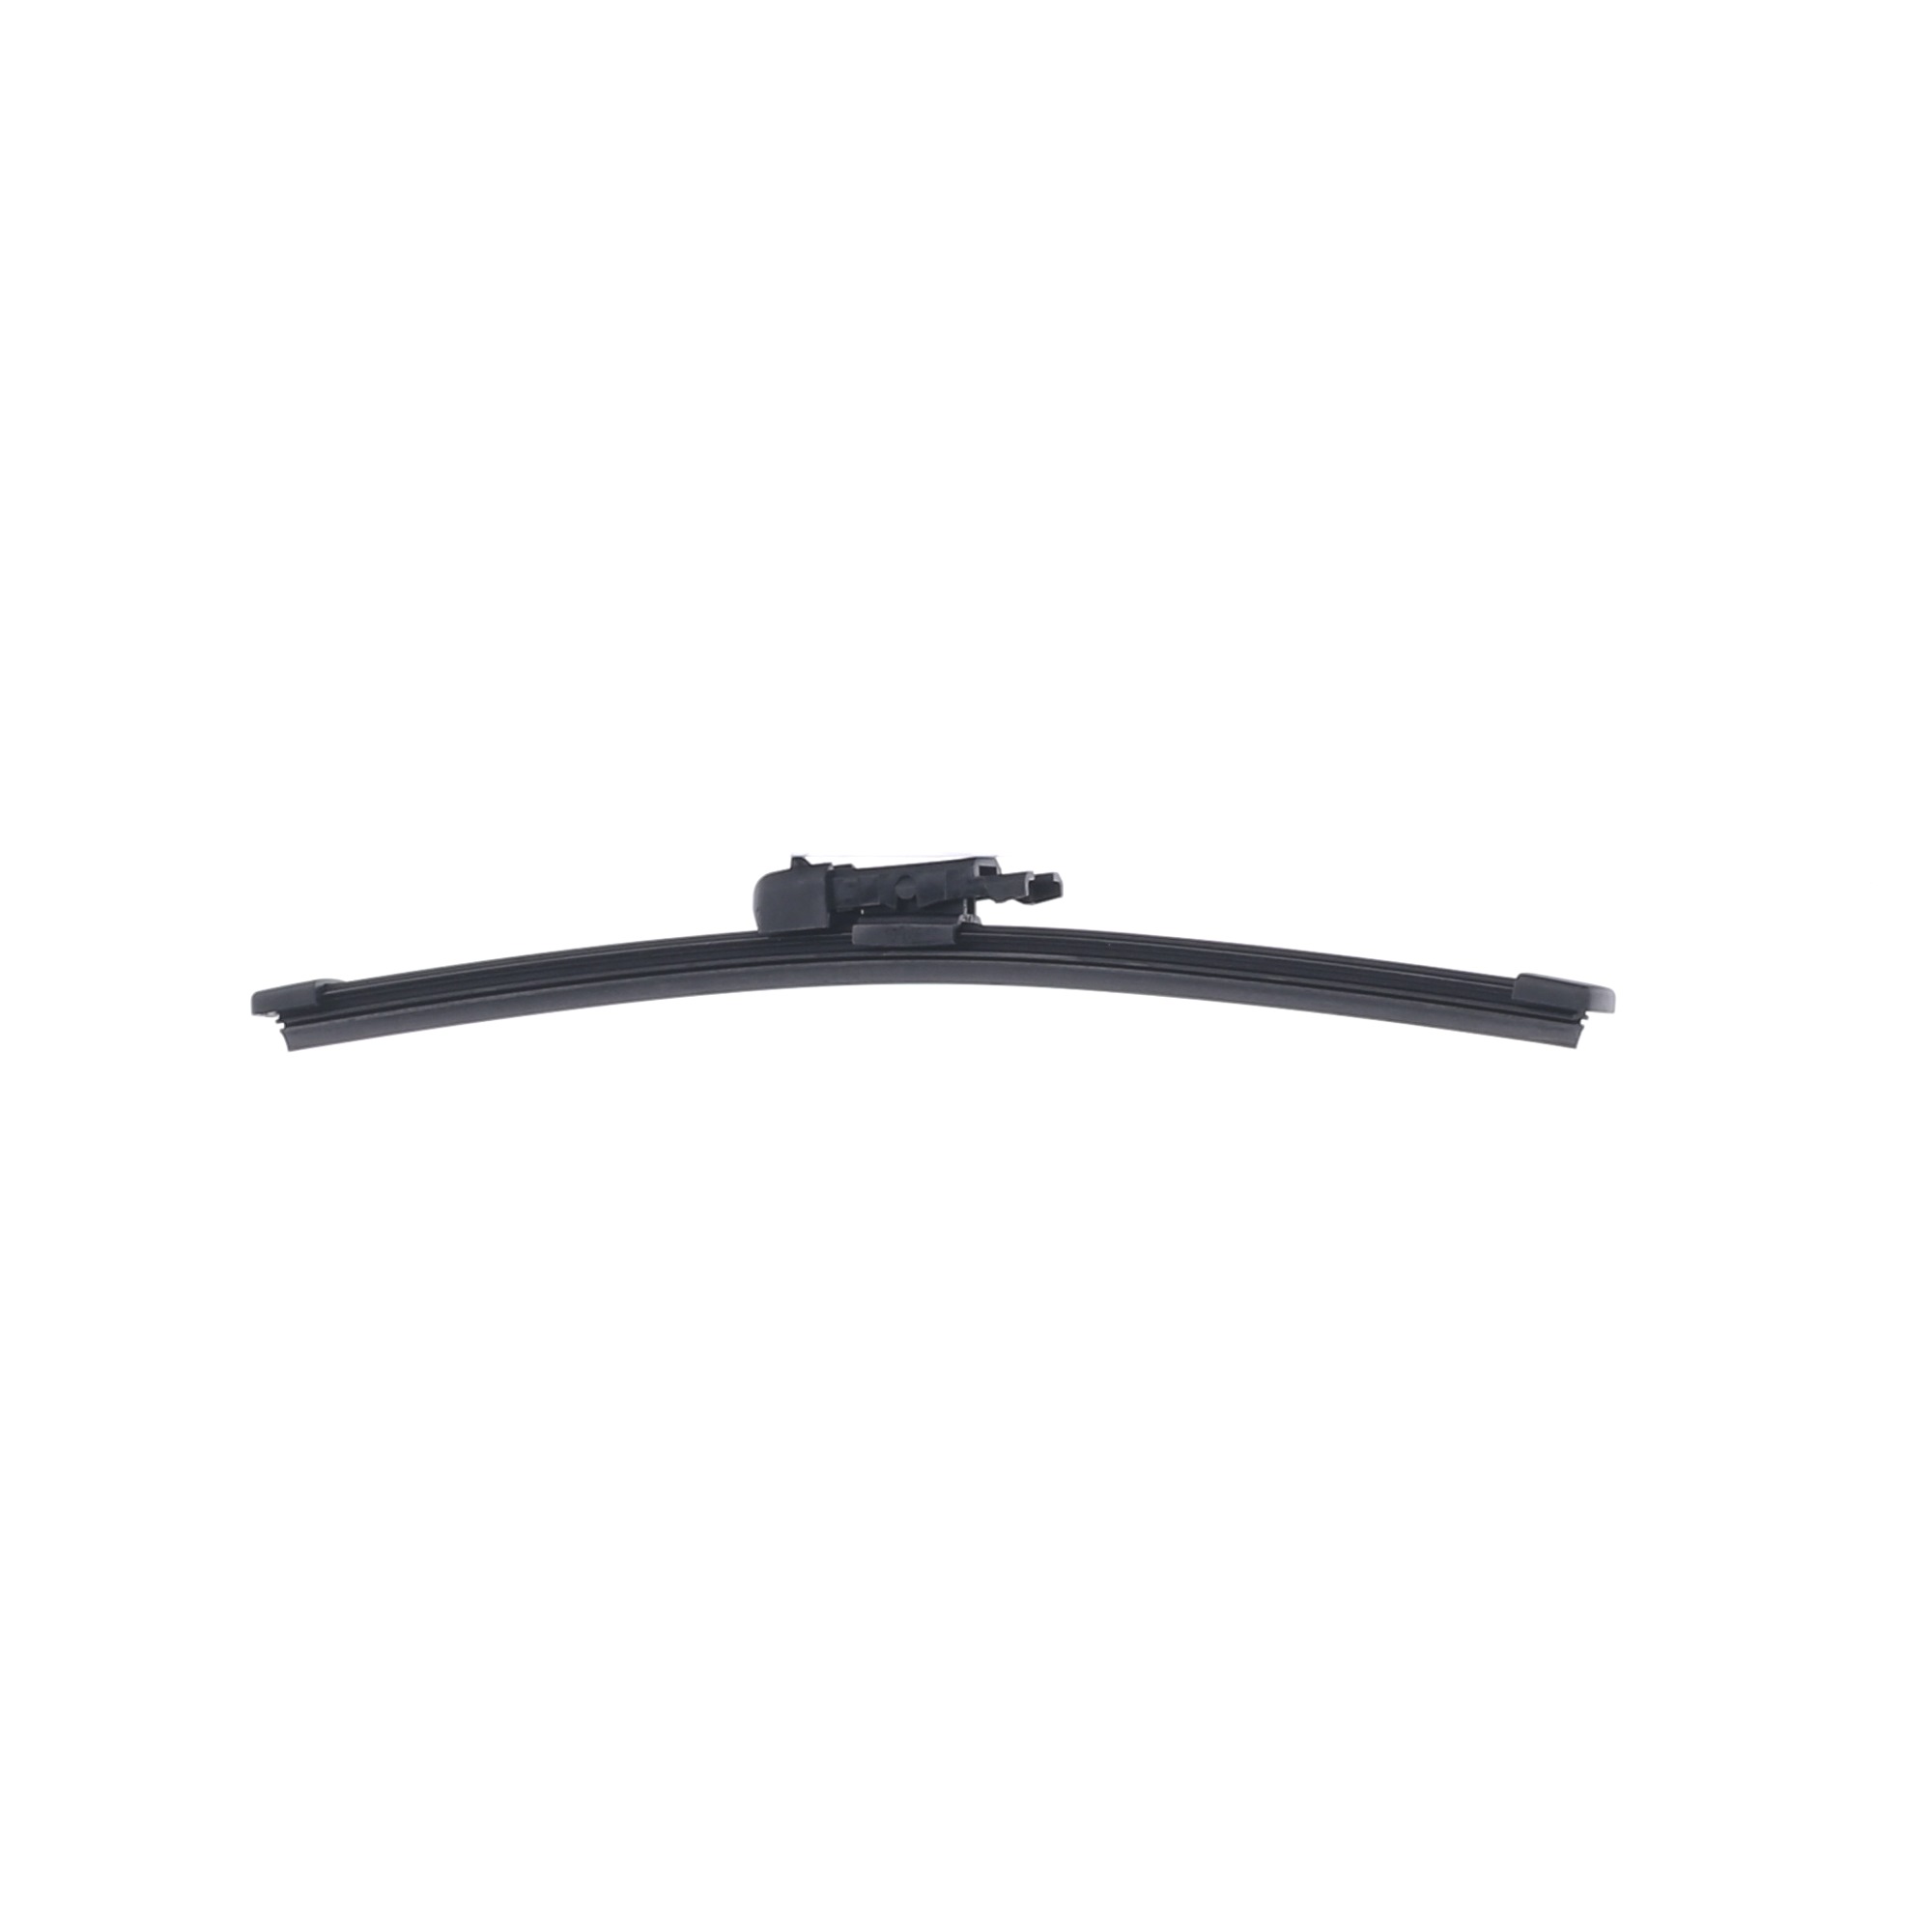 Original Continental 15211 Windshield wipers 2800011521180 for MERCEDES-BENZ A-Class